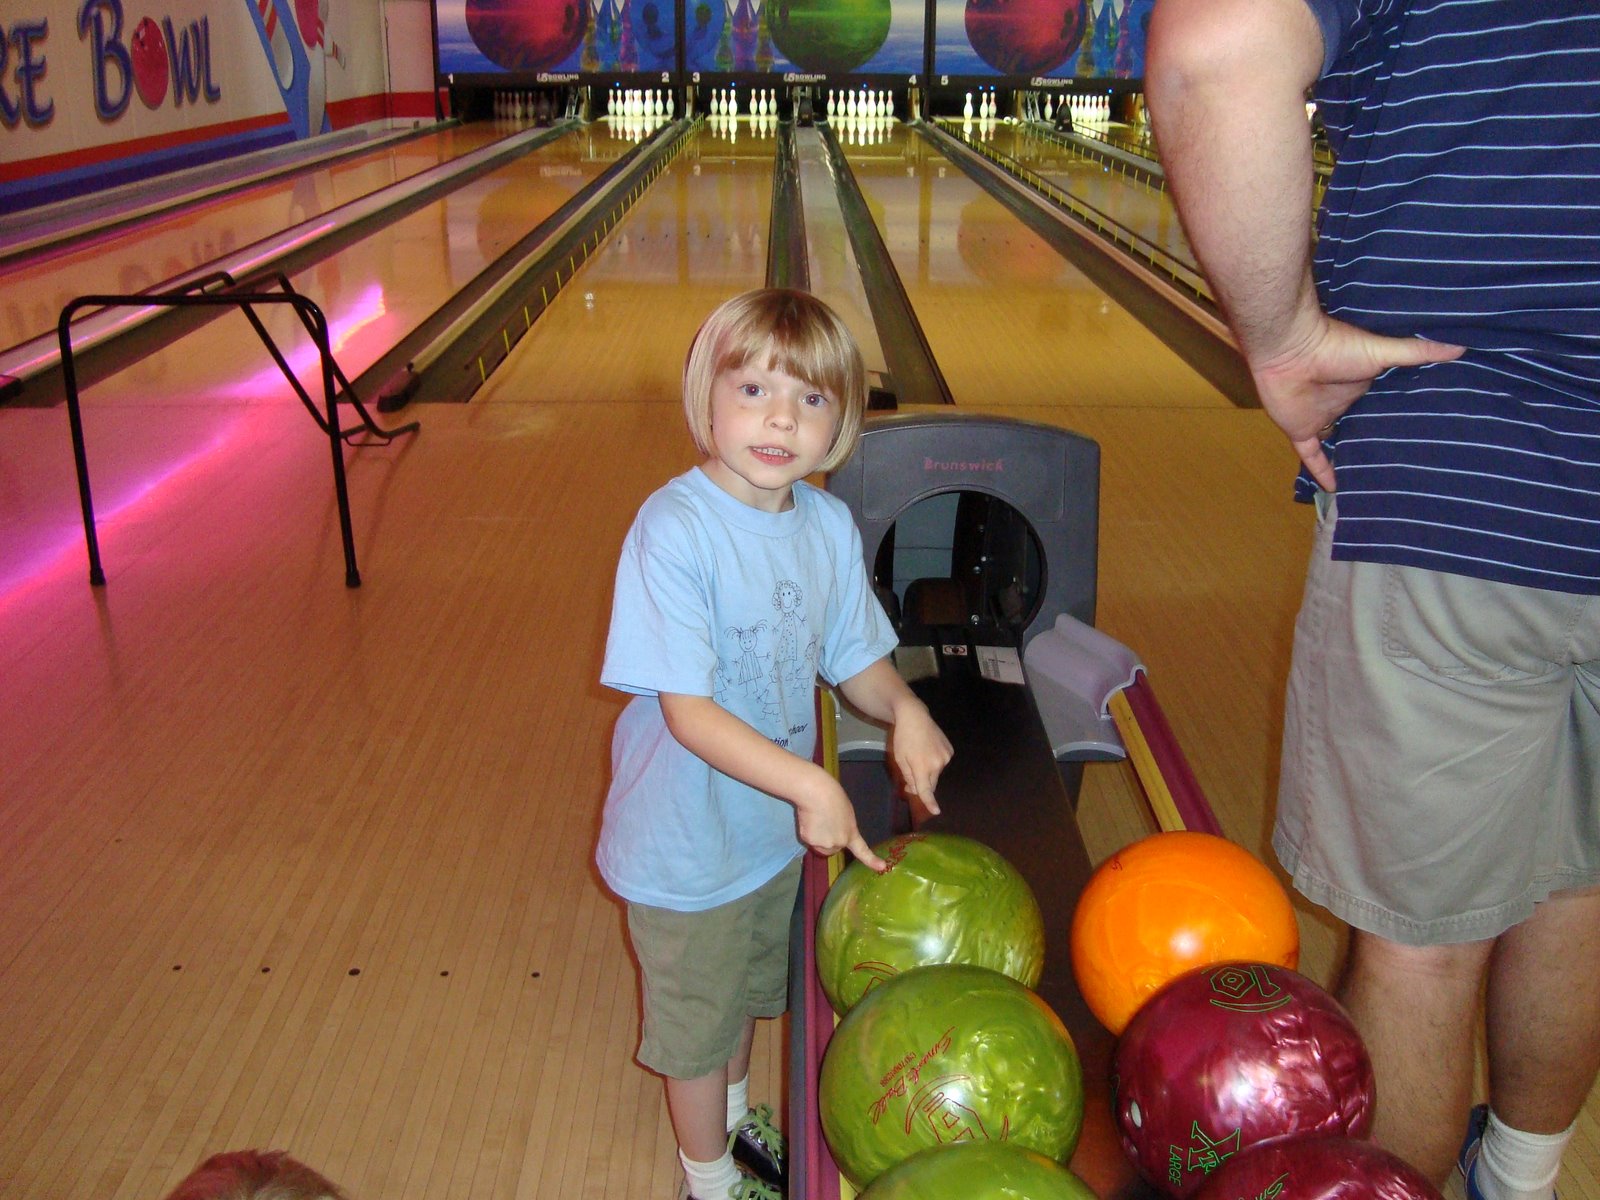 [June+13+2008+Bowling+with+Preschool+end+of+year+activity+(4).JPG]